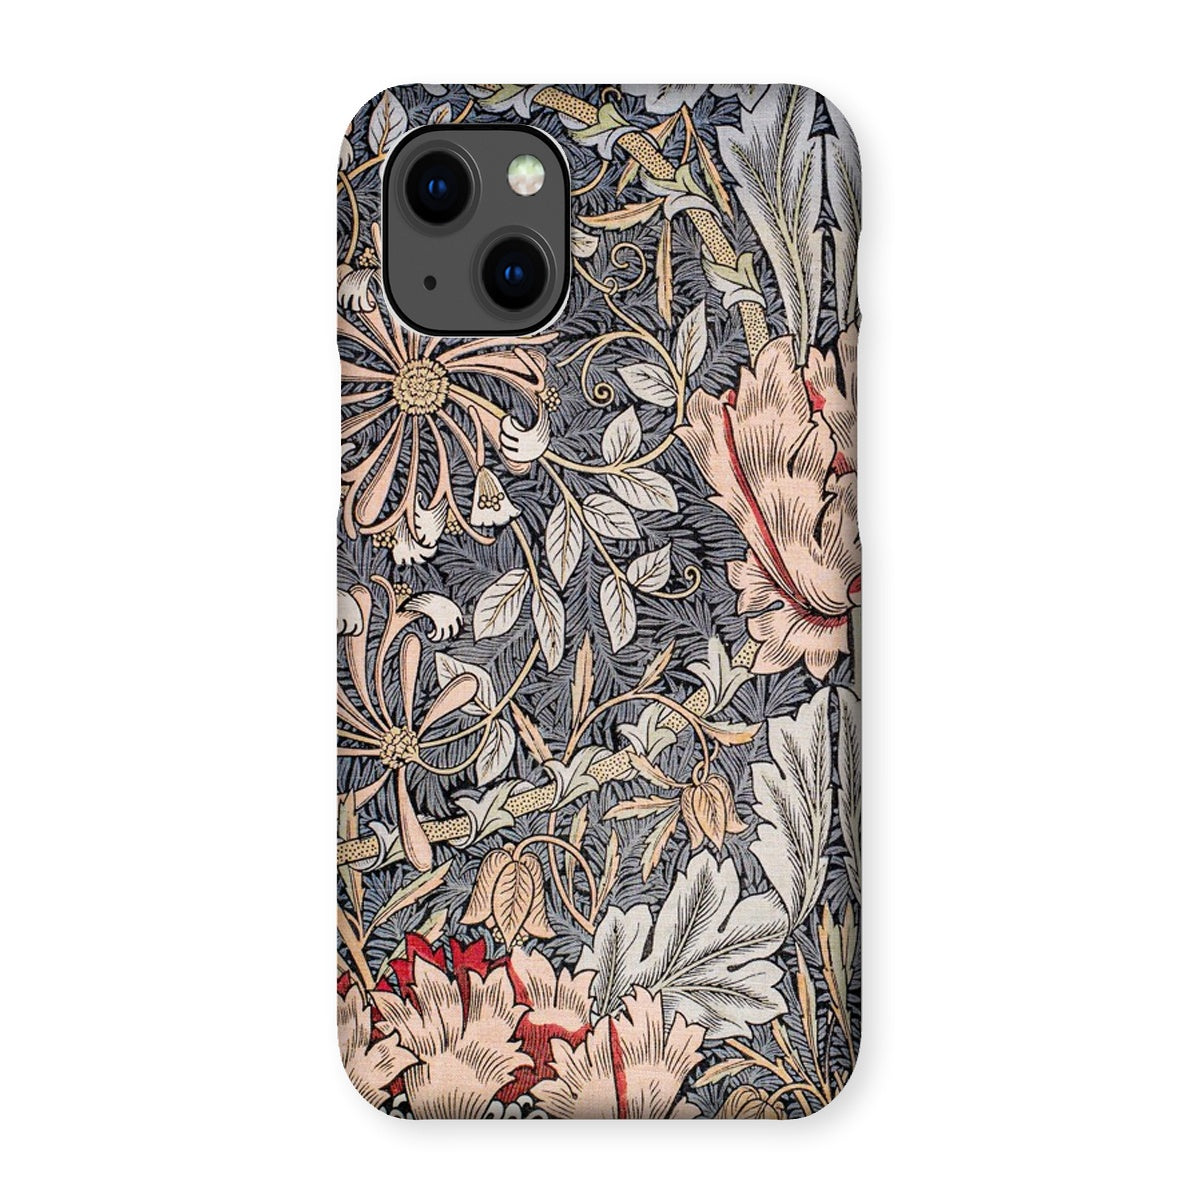 The Invisible Man// The Invisible Man on Sunday Snap Phone Case